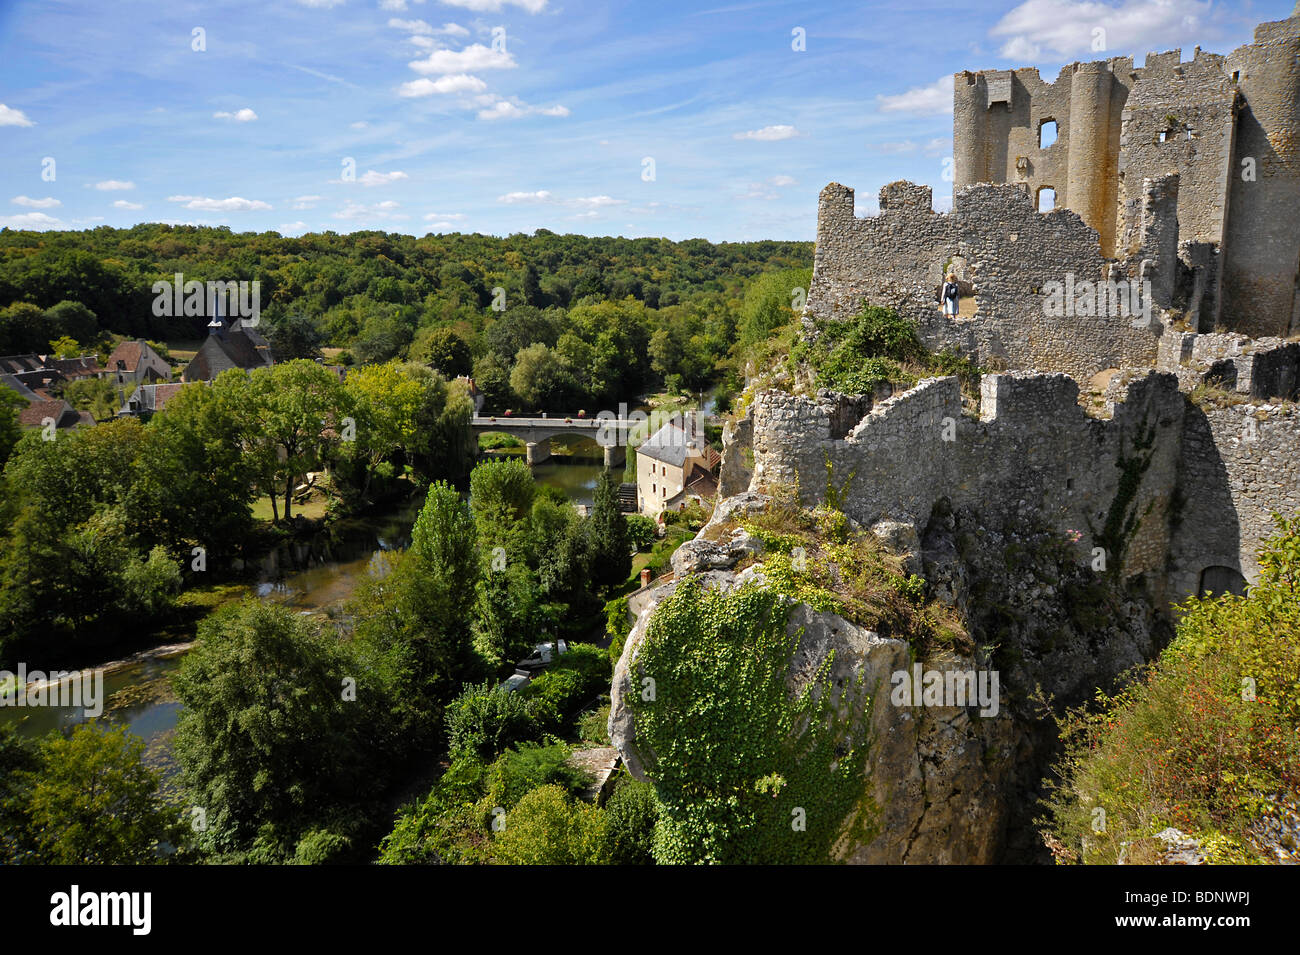 Old chateau ruins at the town of Angles sur l' Anglin, France Stock Photo